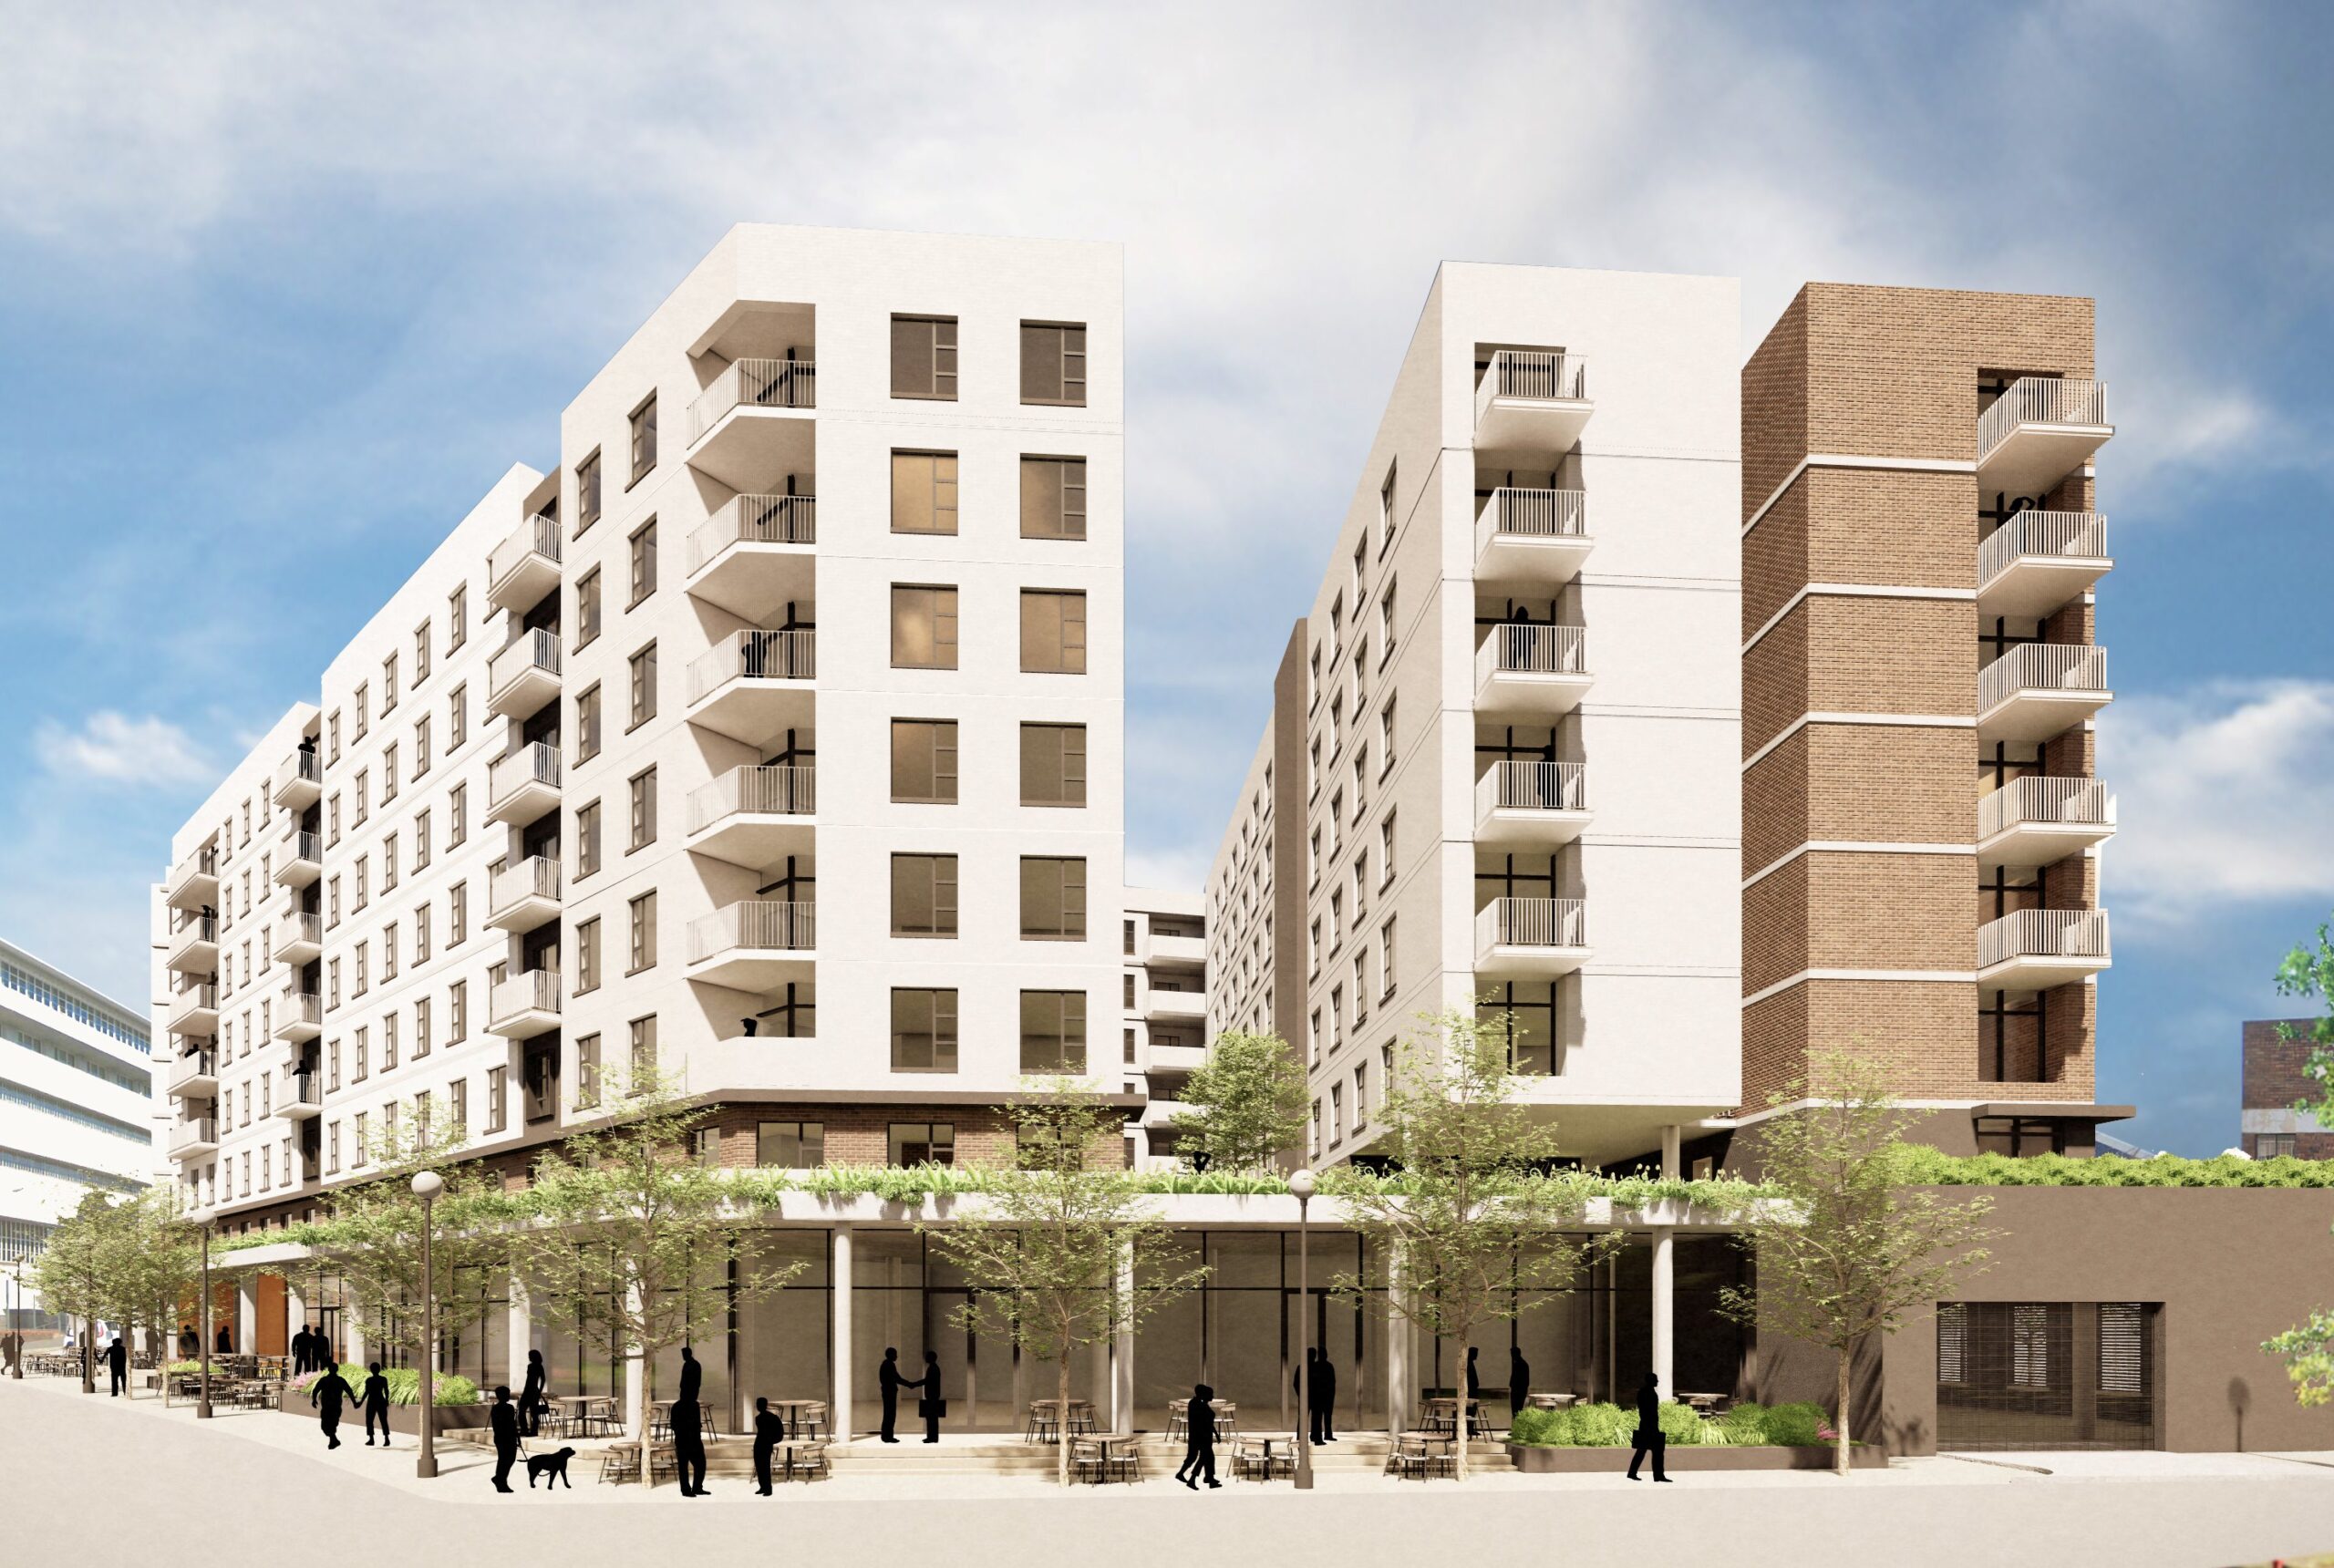 Divercity Takes Its Successful Affordable Housing Model To Cape Town